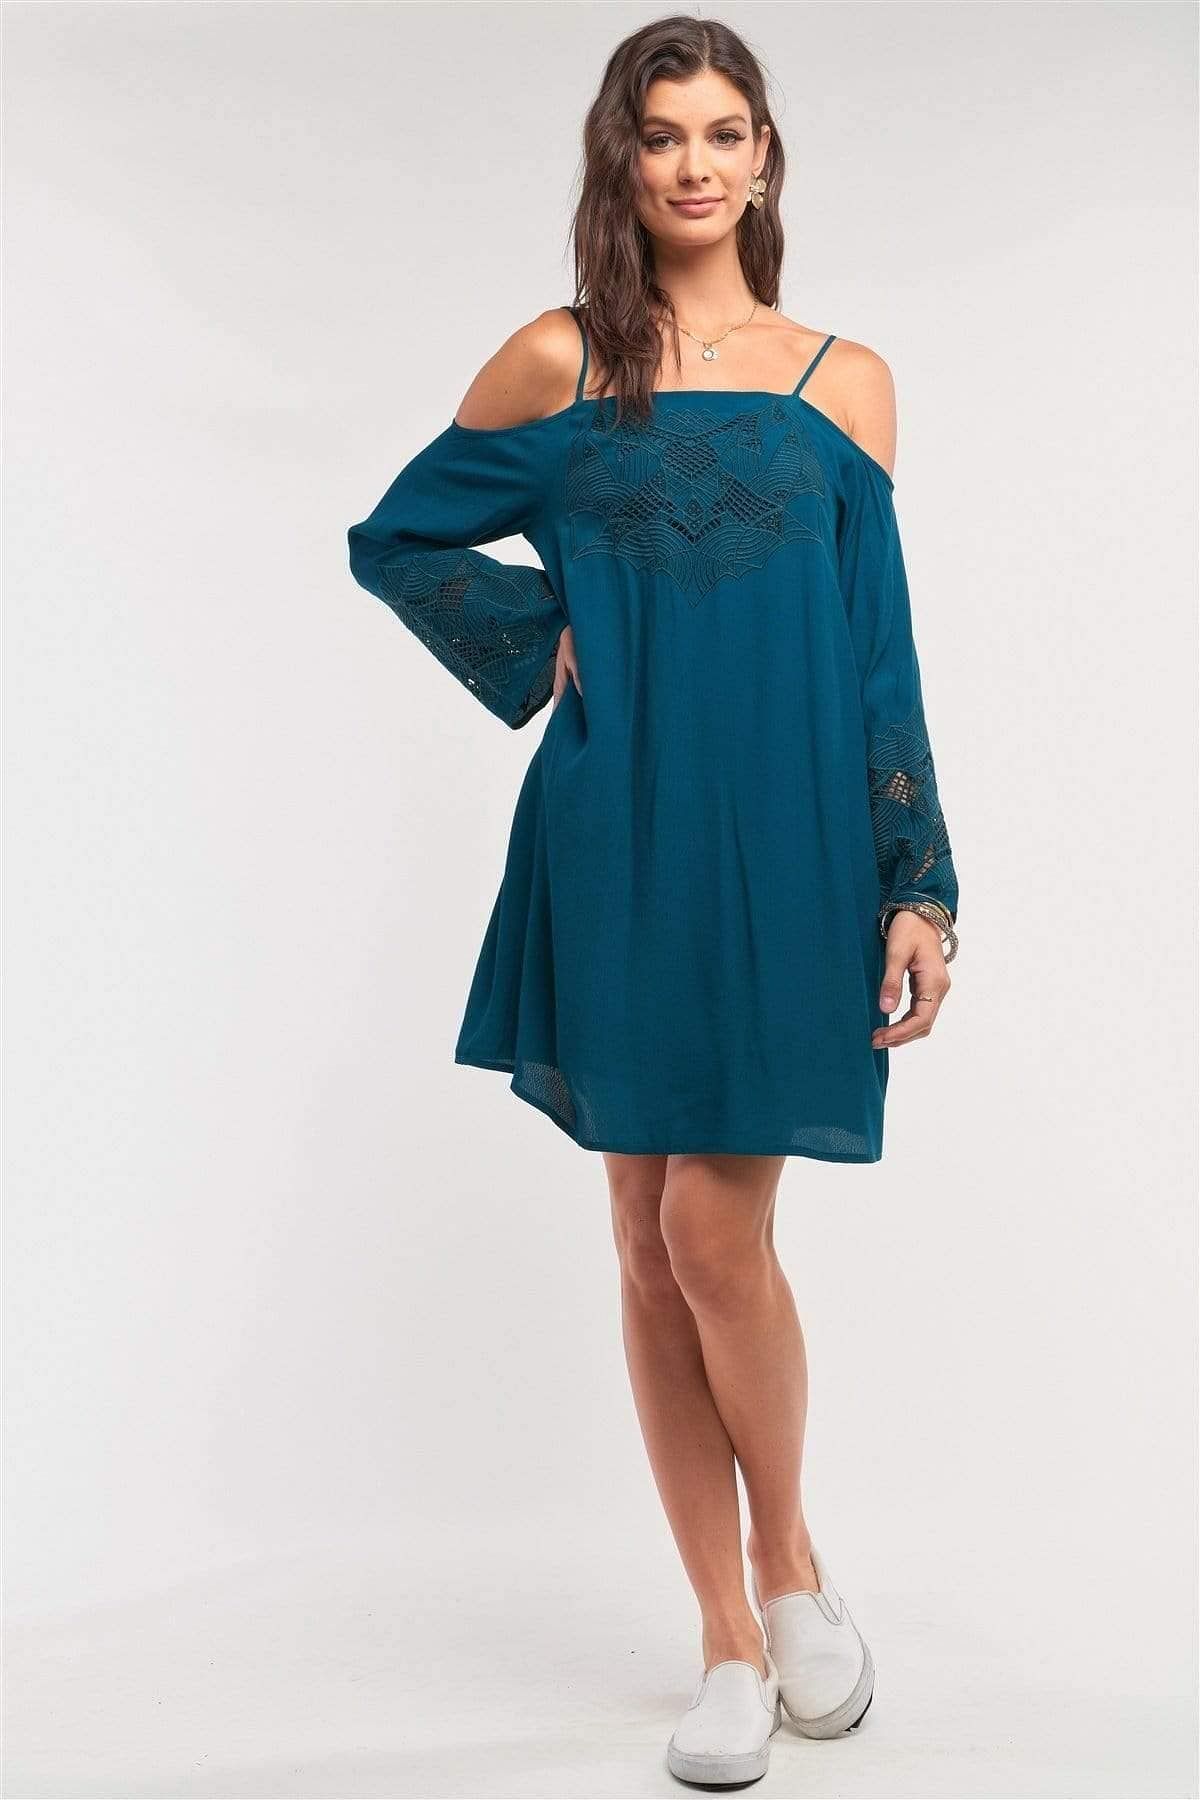 Teal Long Sleeve Off-the-shoulder Mini Dress - Shopping Therapy S Dress